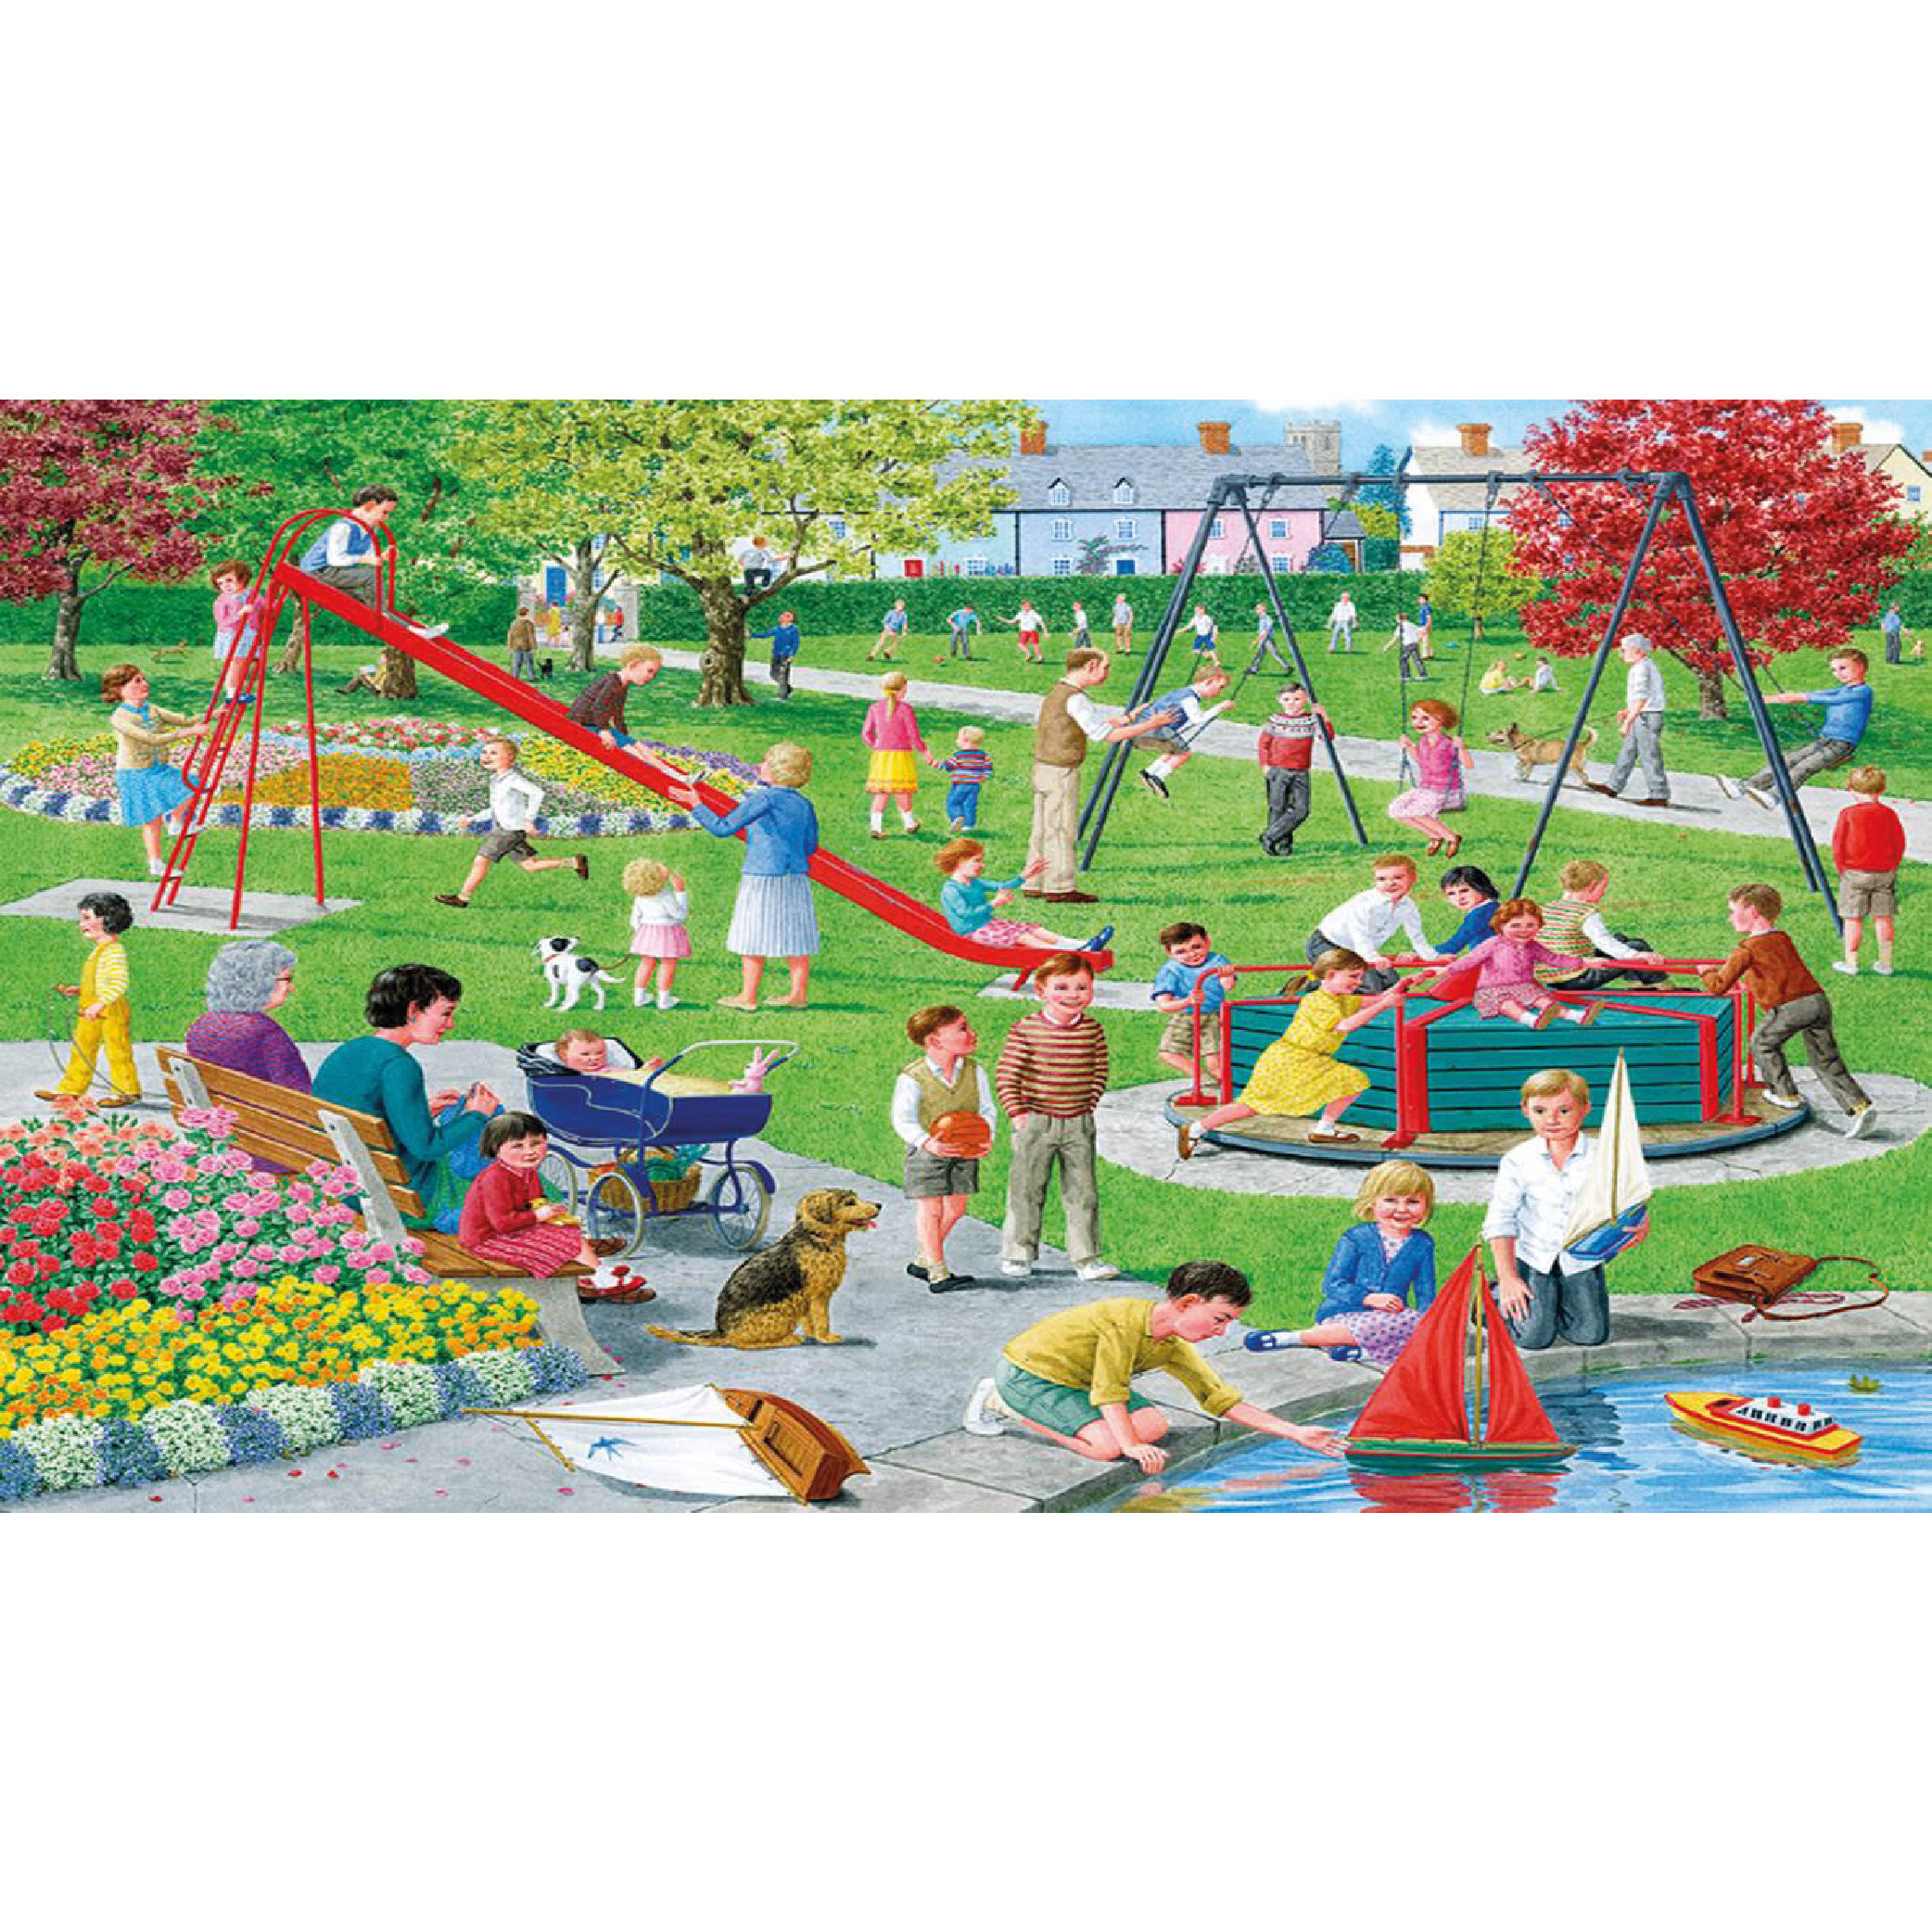 XL 500 piece Jigsaw - Swings & Roundabouts - The Partially Sighted ...